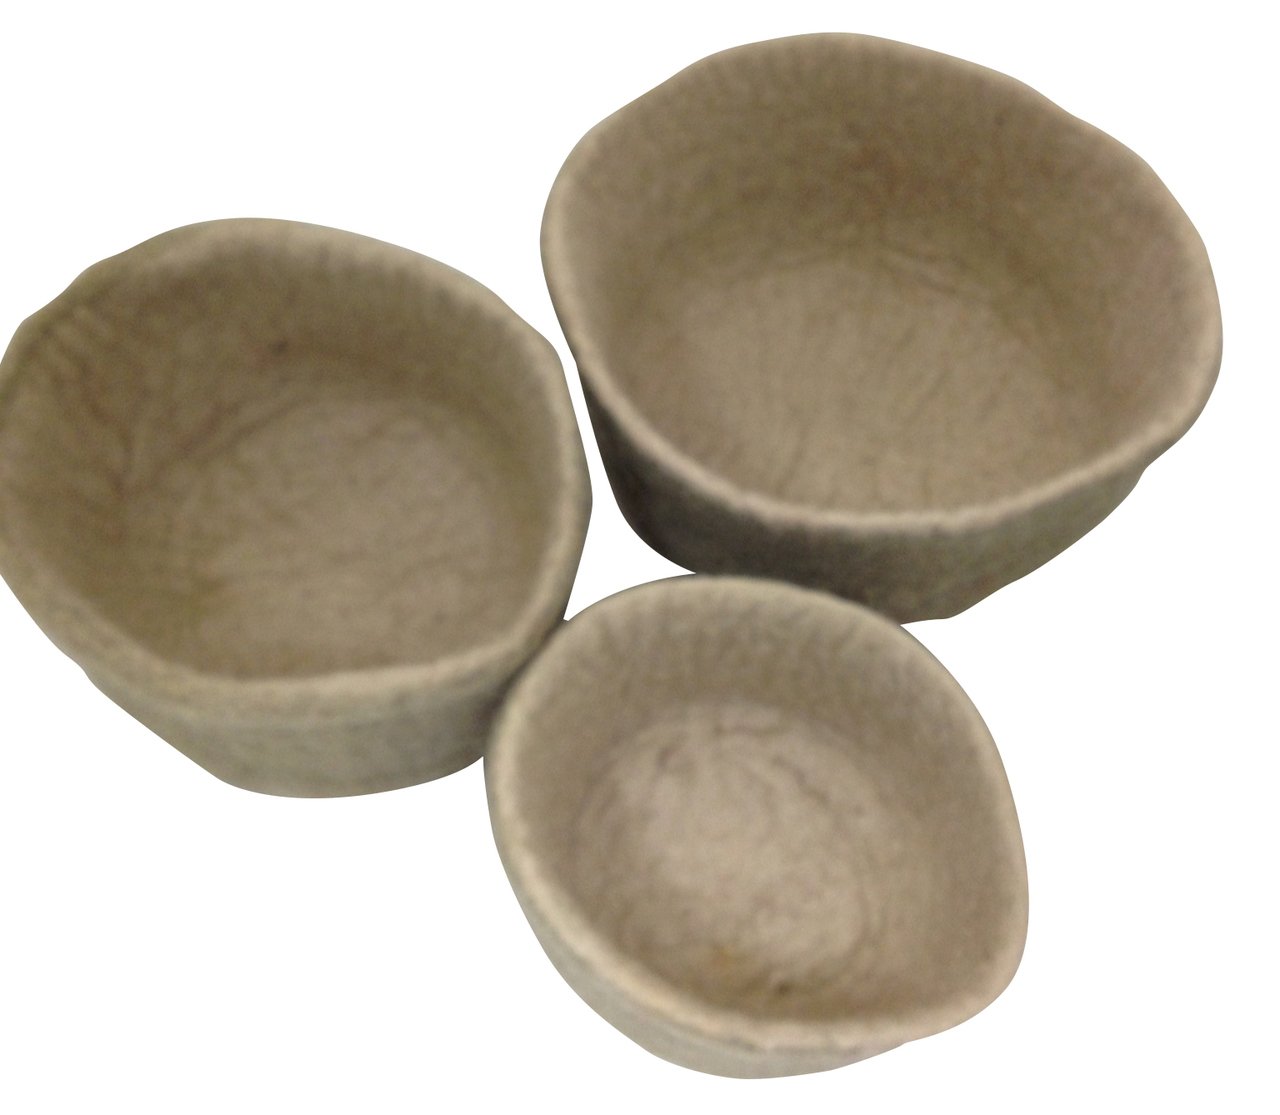 Earth Nested Bowls- Natural (Set of 3)